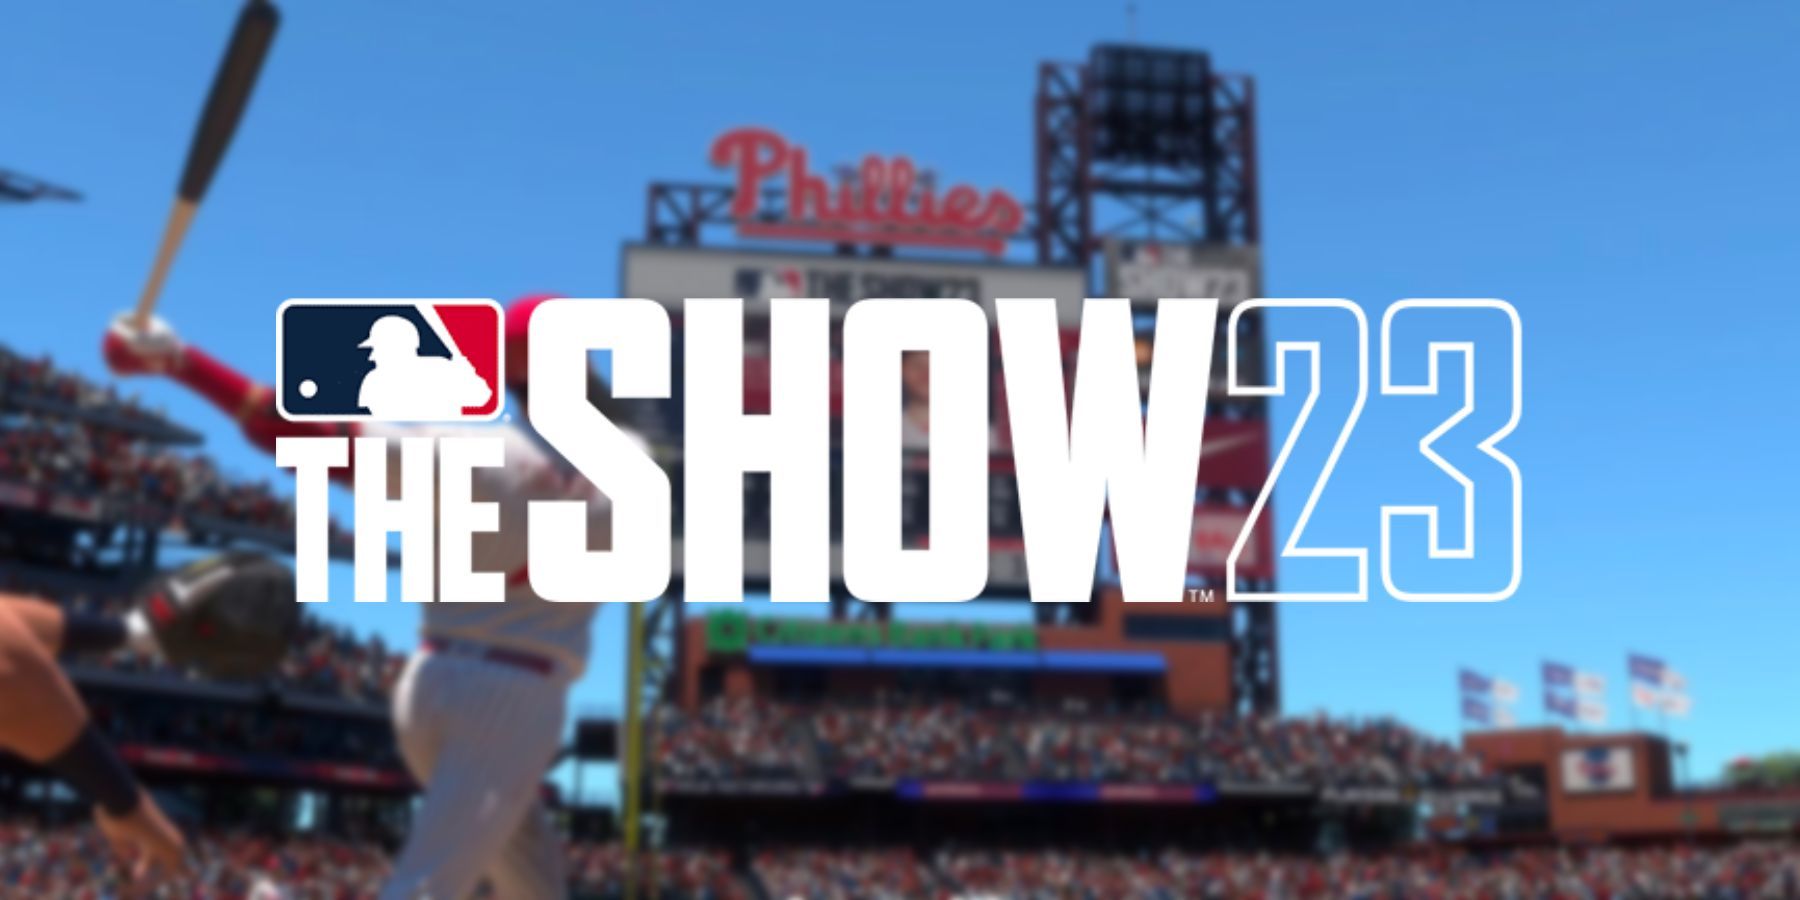 All New Features Confirmed for MLB The Show 23